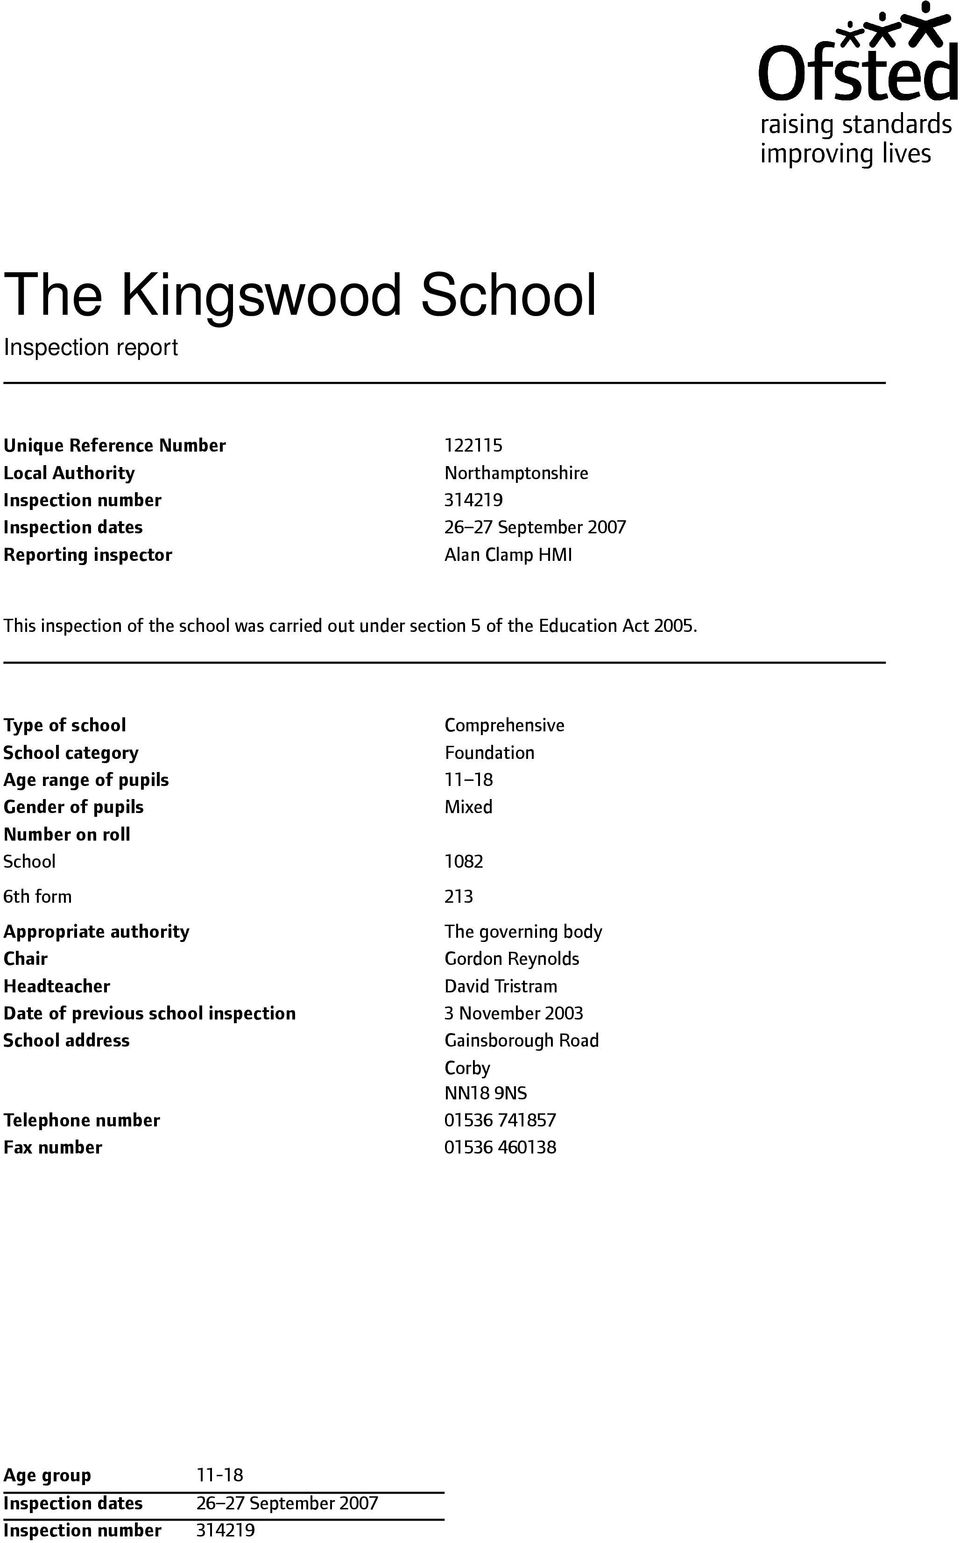 Type of school School category Age range of pupils Gender of pupils Number on roll School 6th form Appropriate authority Chair Headteacher Date of previous school inspection School